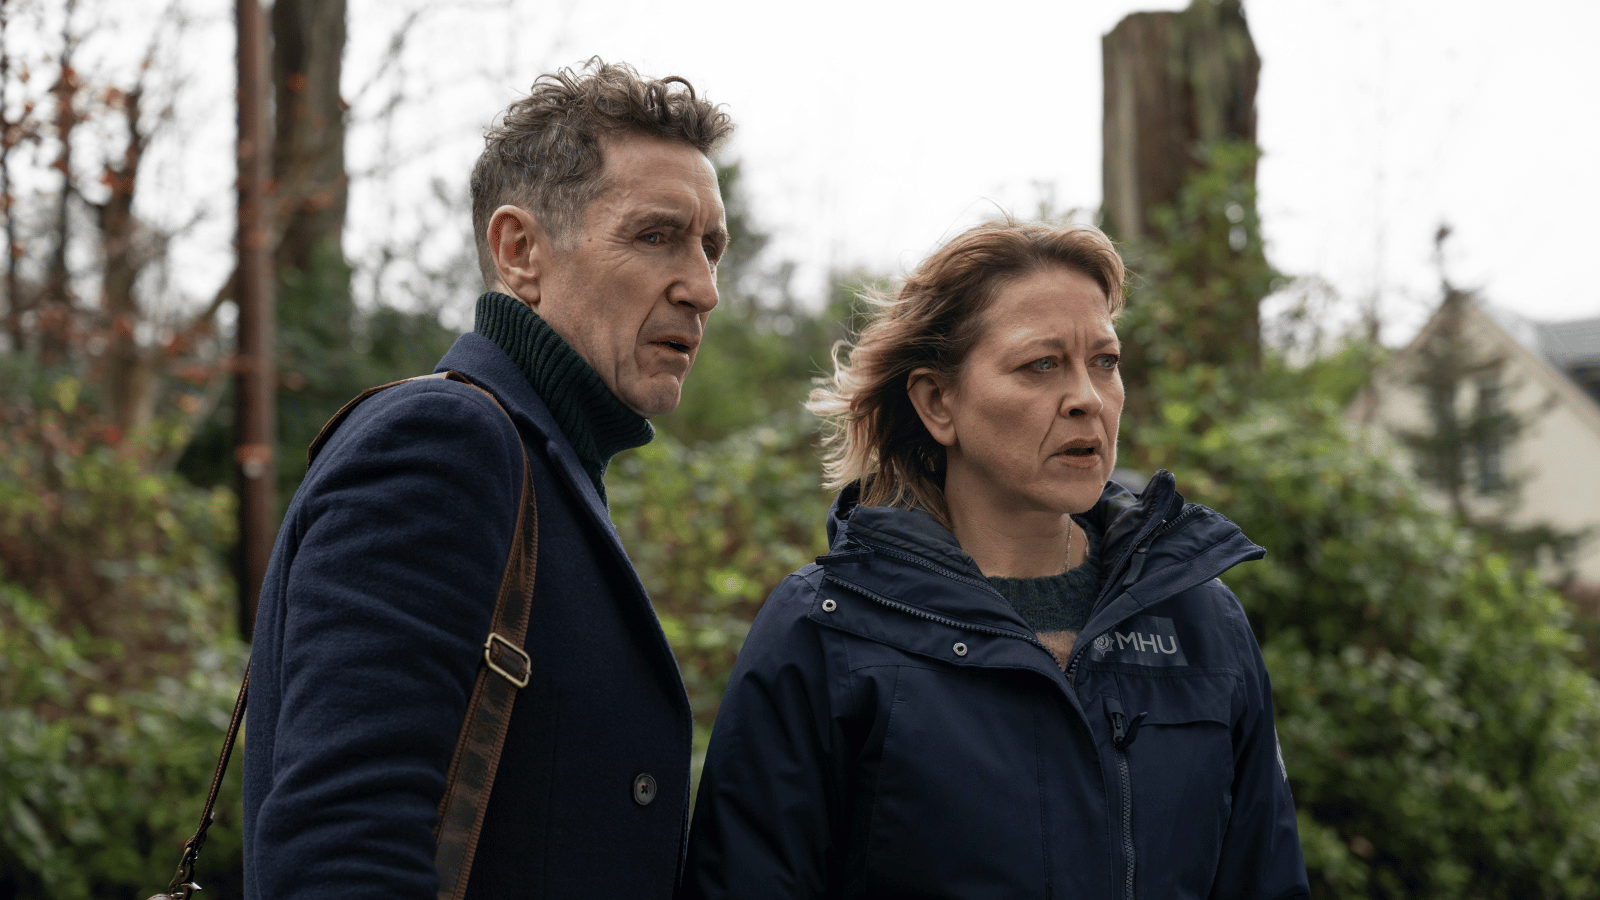 Still from Annika S2. Nicola Walker as Annika and man look concerned standing outside in front of bushes.